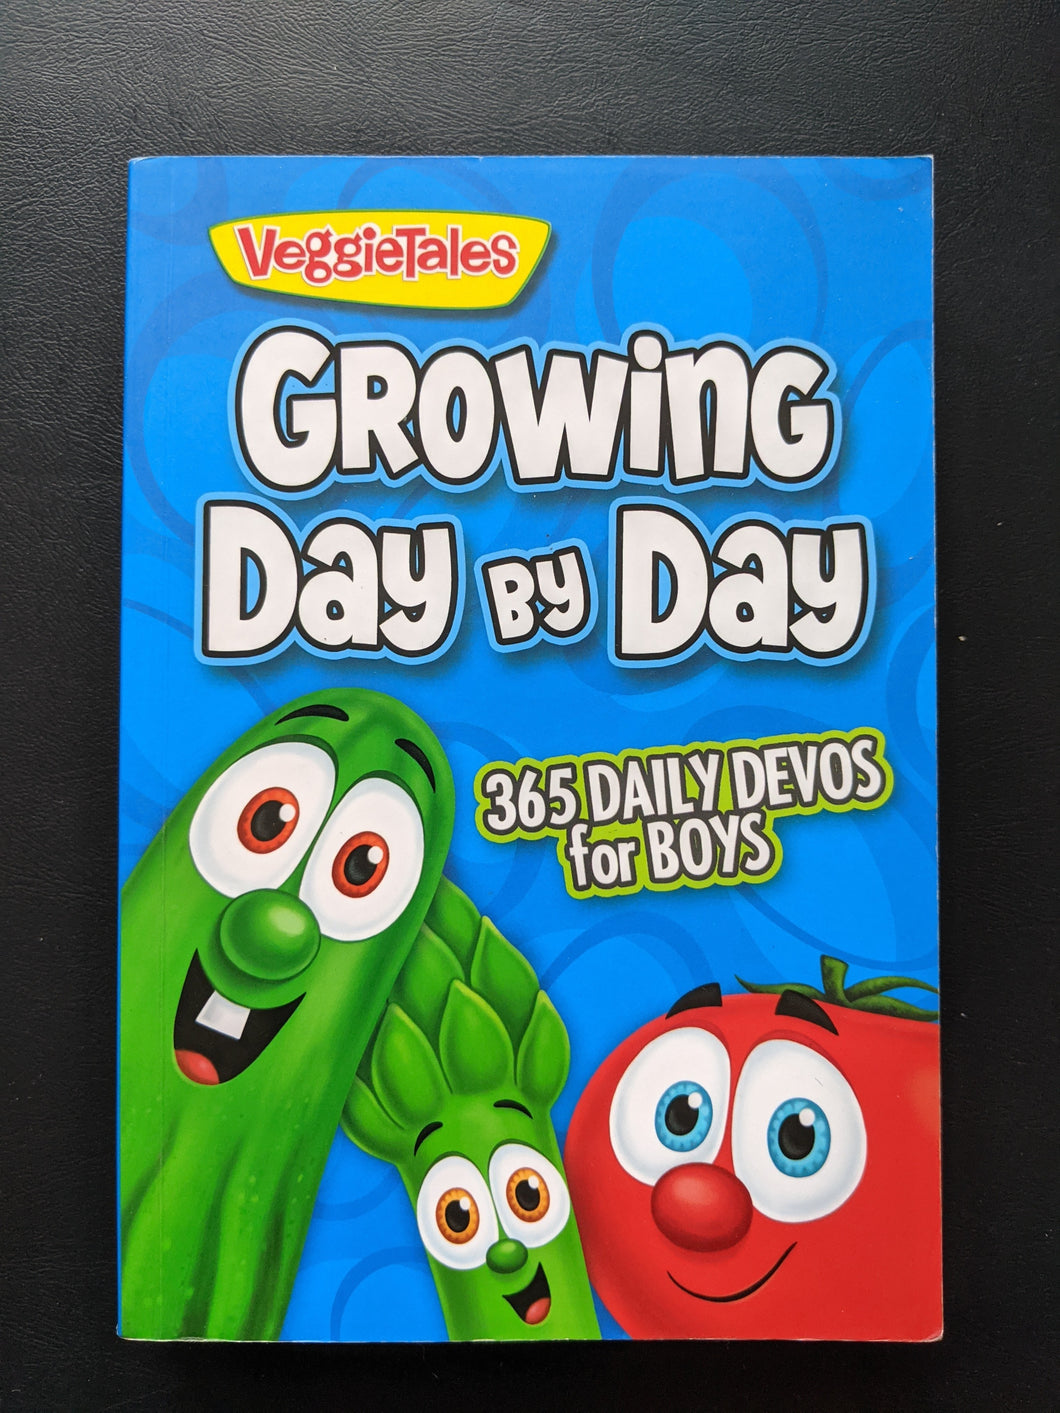 Growing Day by Day for Boys by VeggieTales